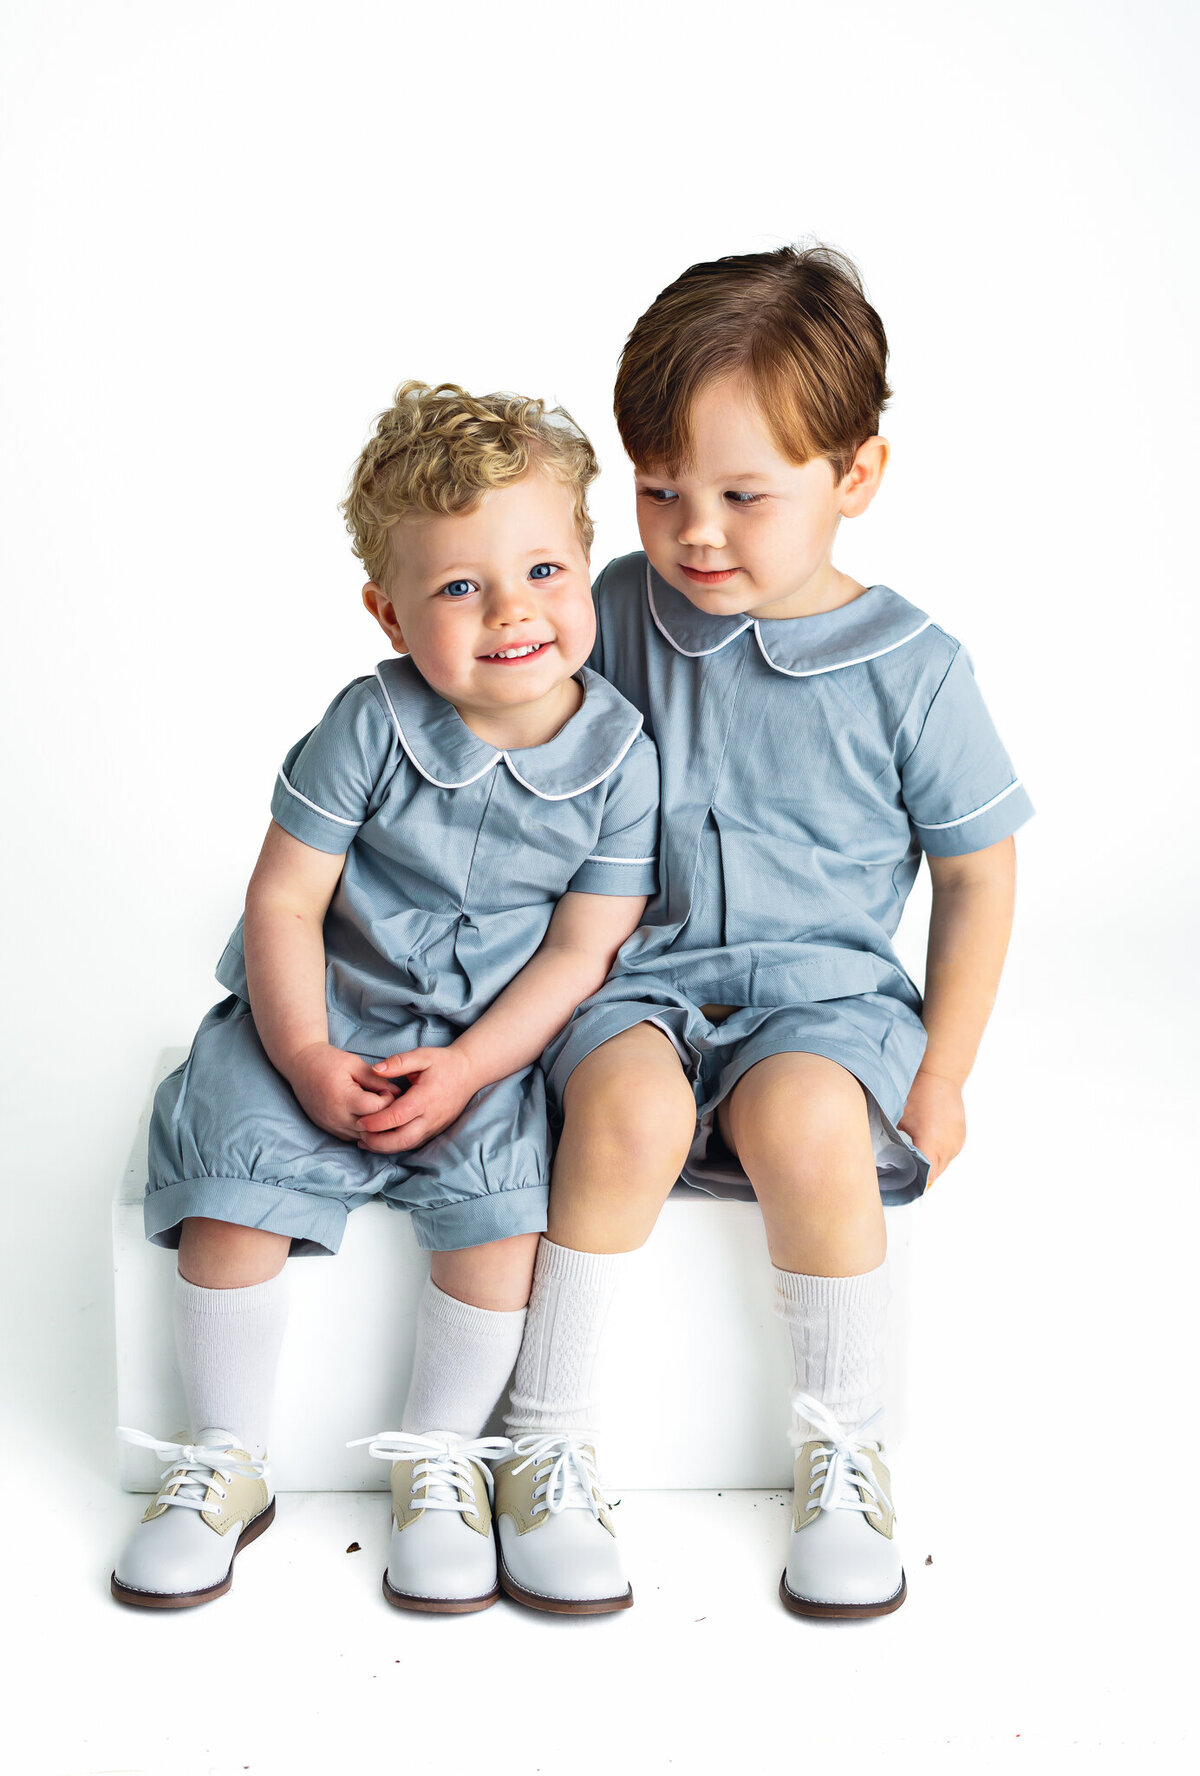 Two young boys in blue outfits are sitting on a white block as they pose for pictures.